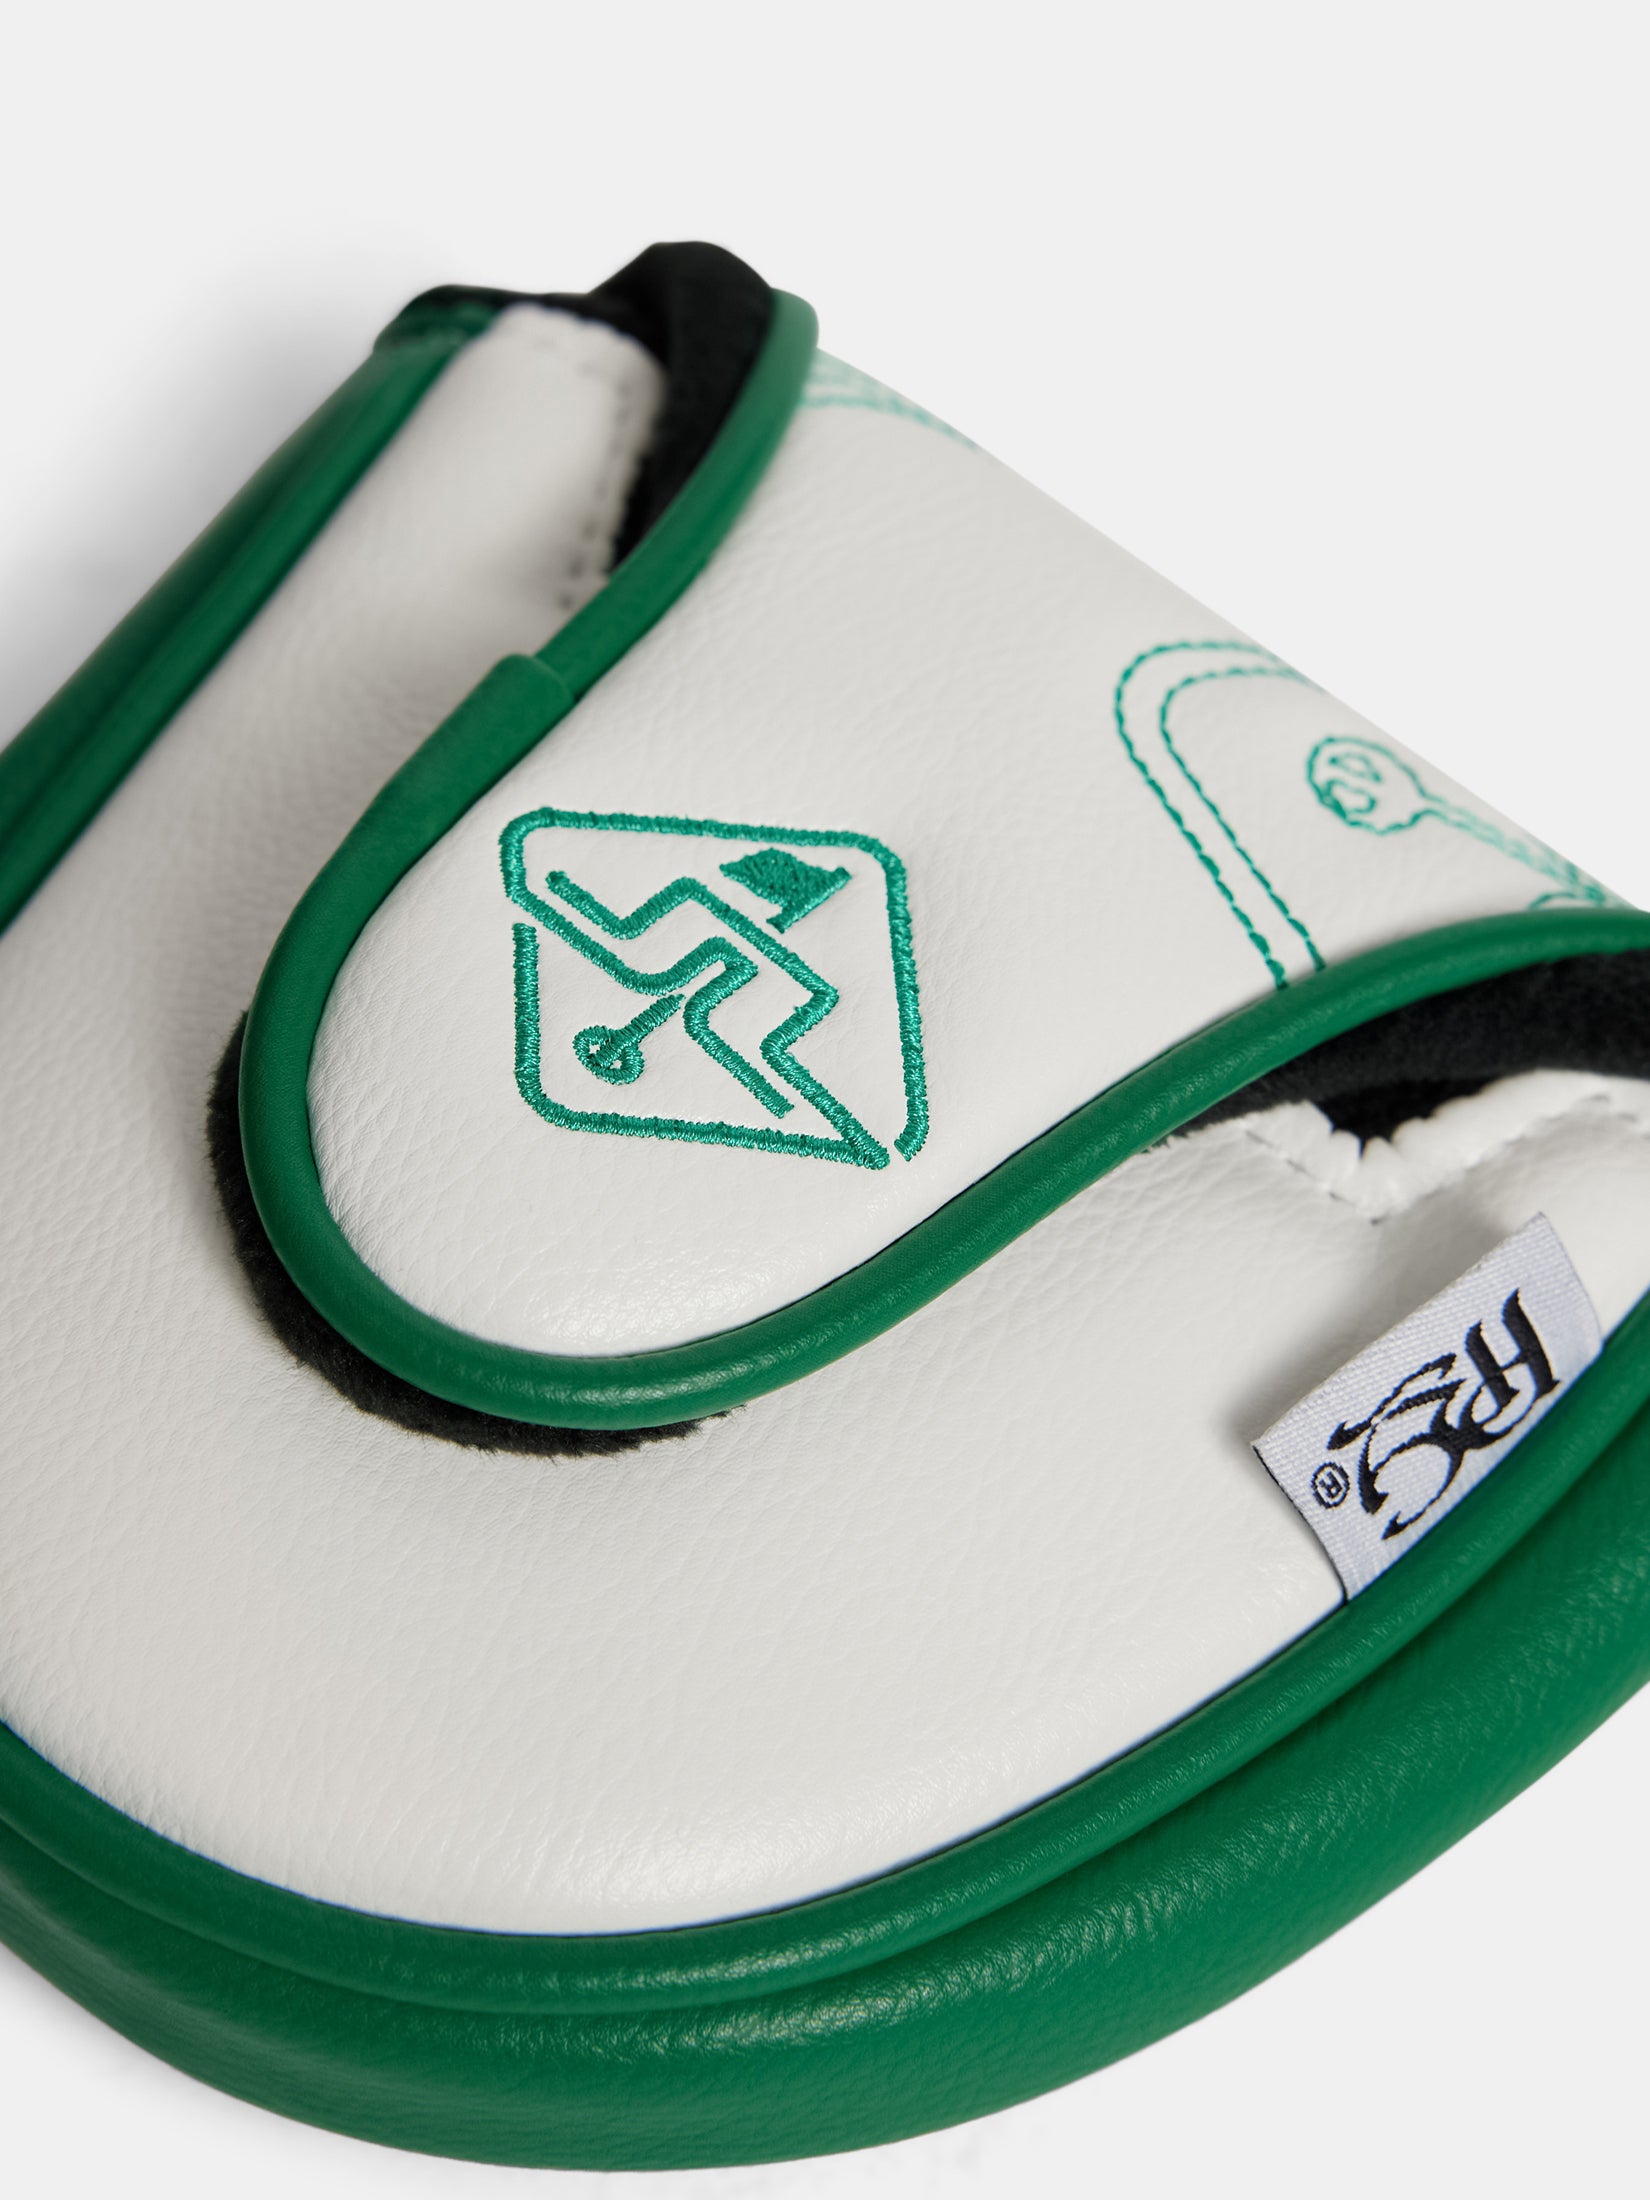 House of JL Mallet Putter Cover